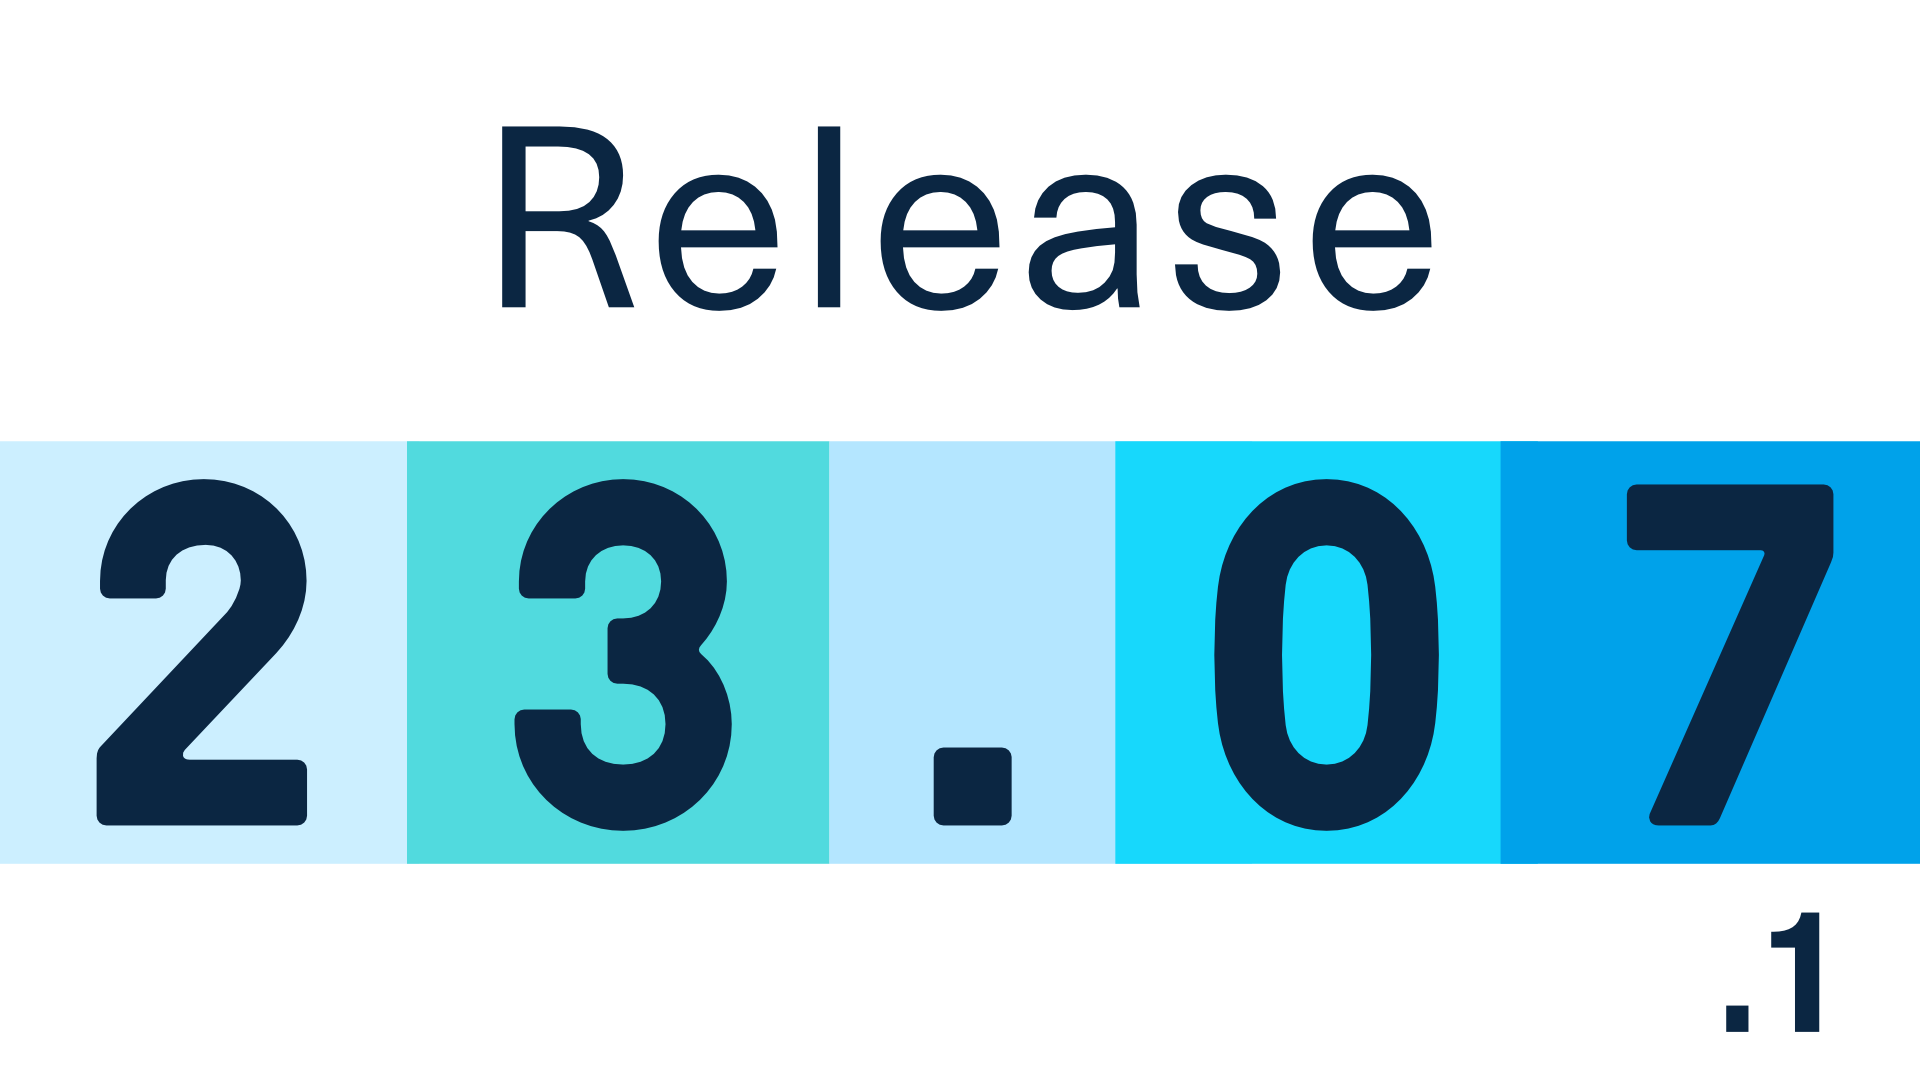 Release 23.07.1